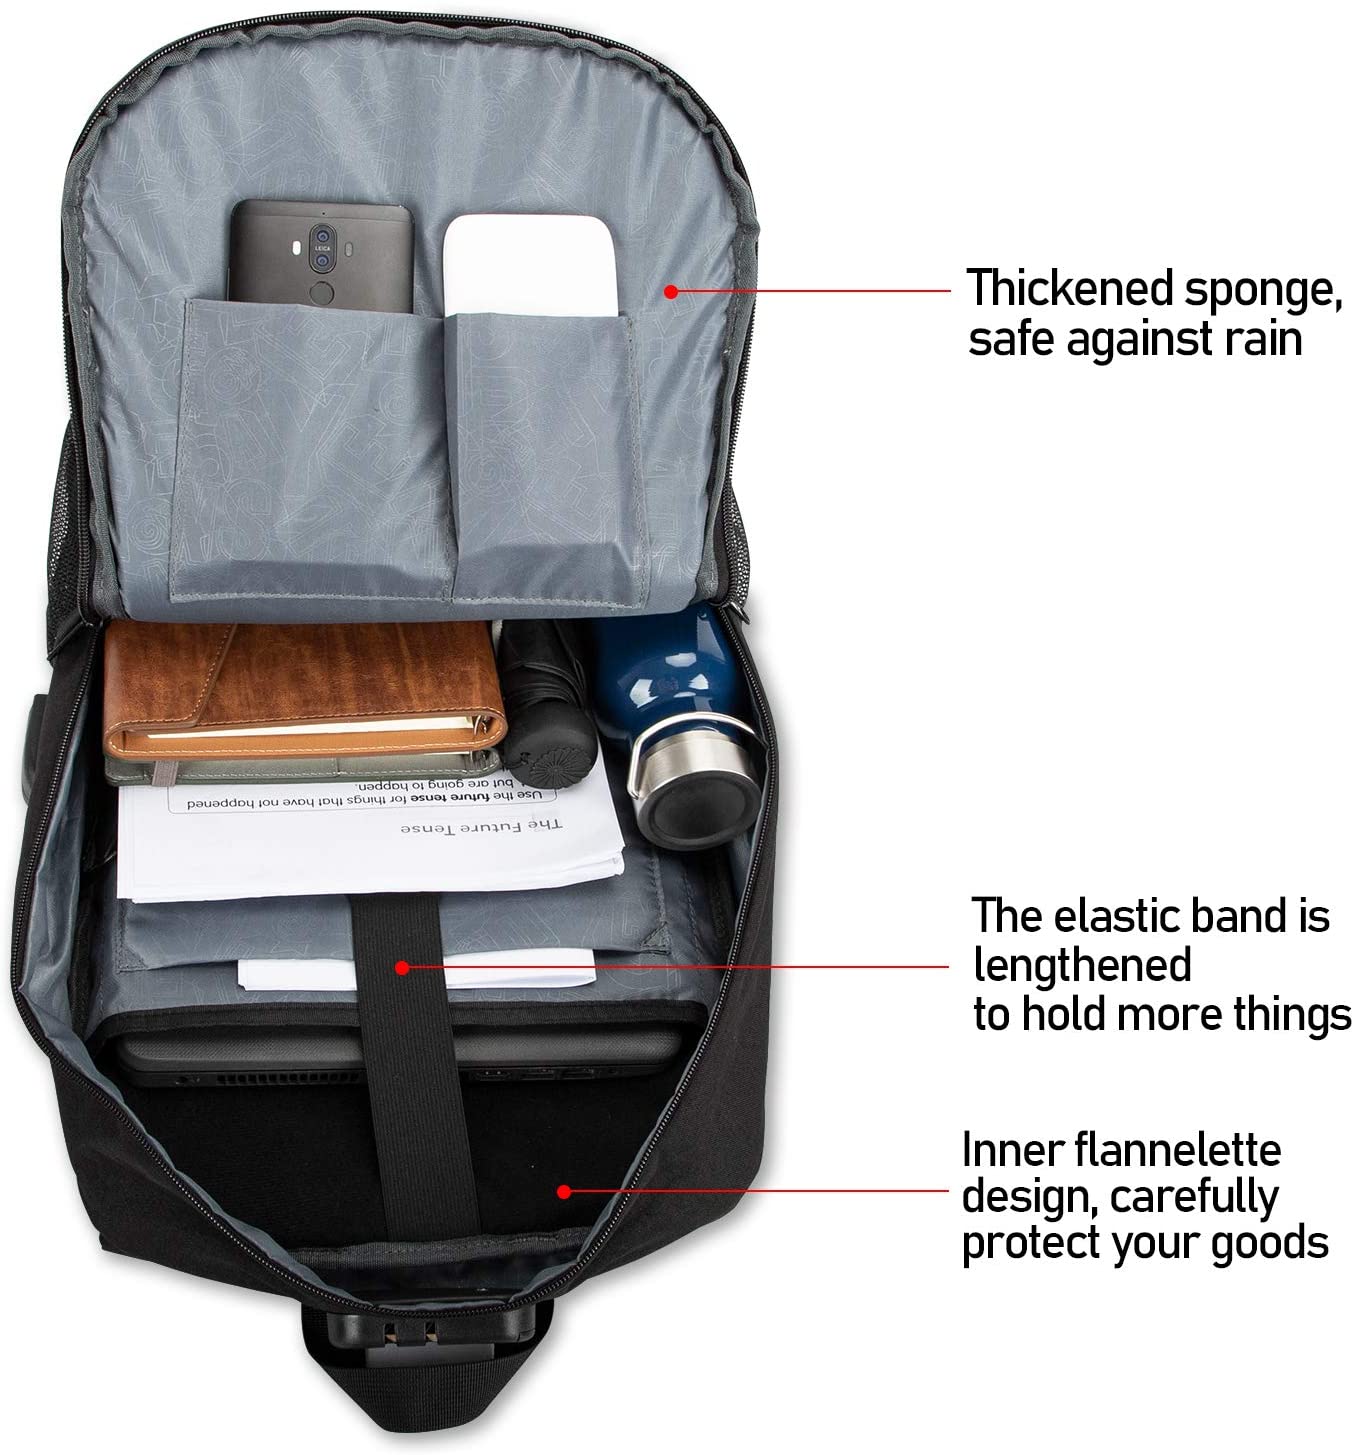 Themoteck Skateboard Backpack inside features